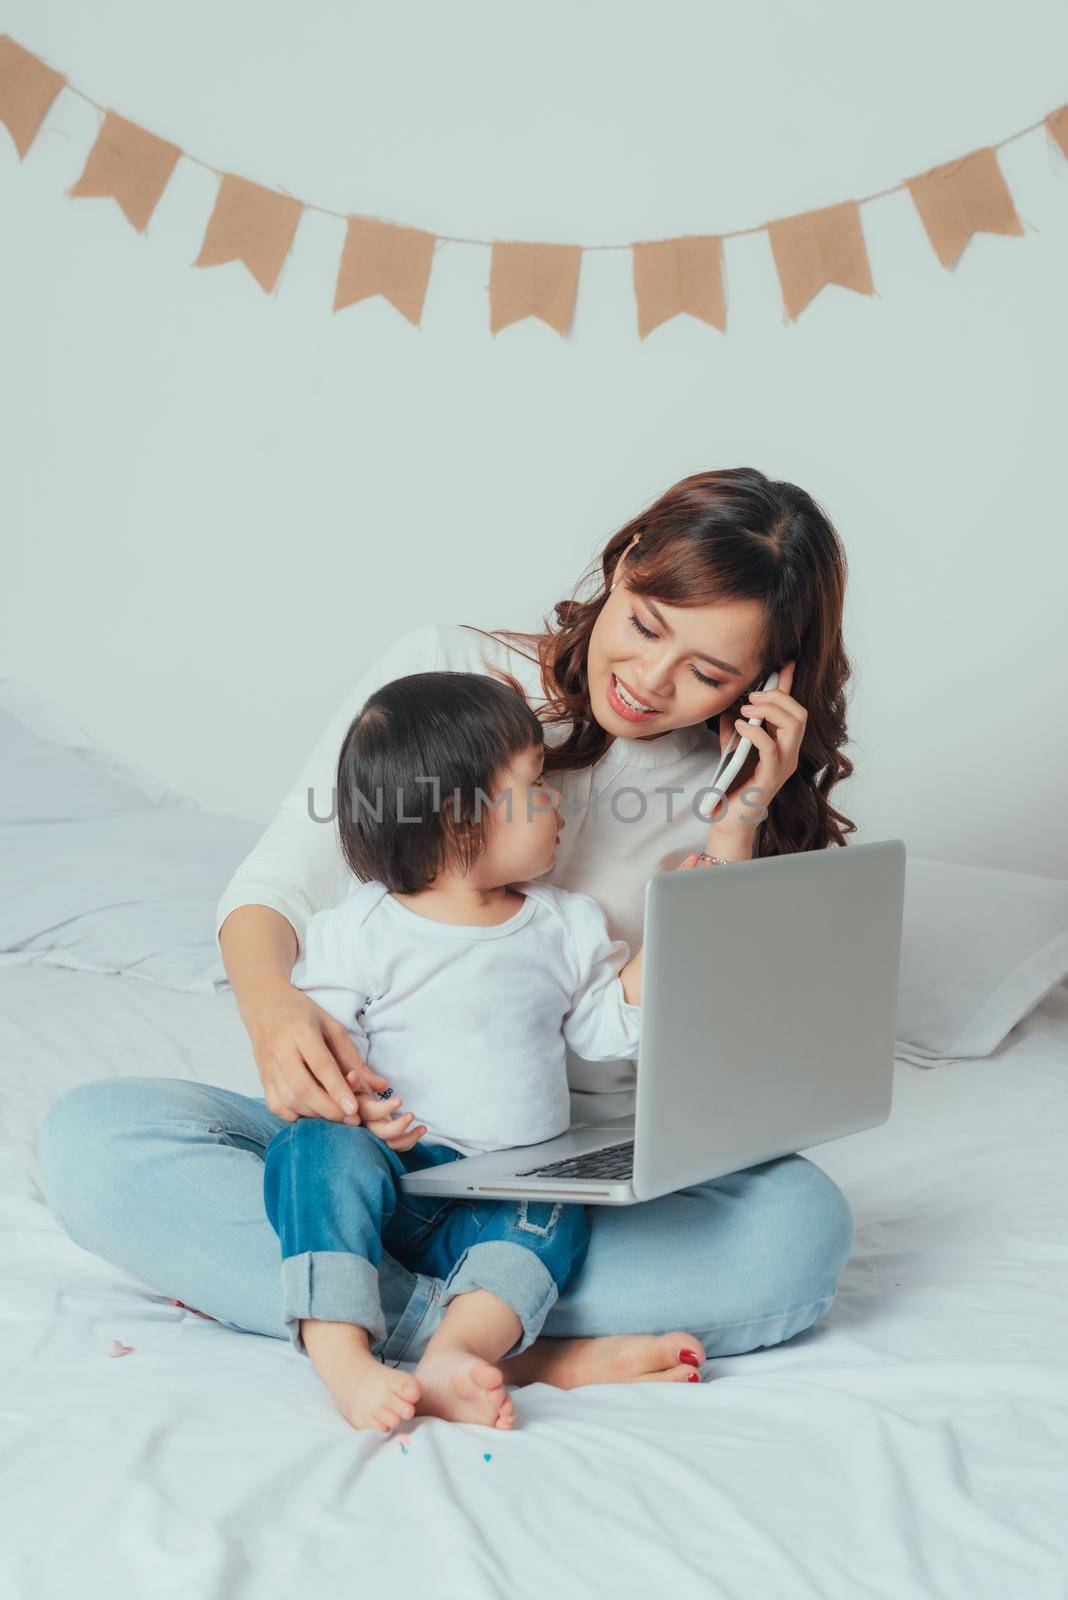 Working mother with her daughter in bedroom at home